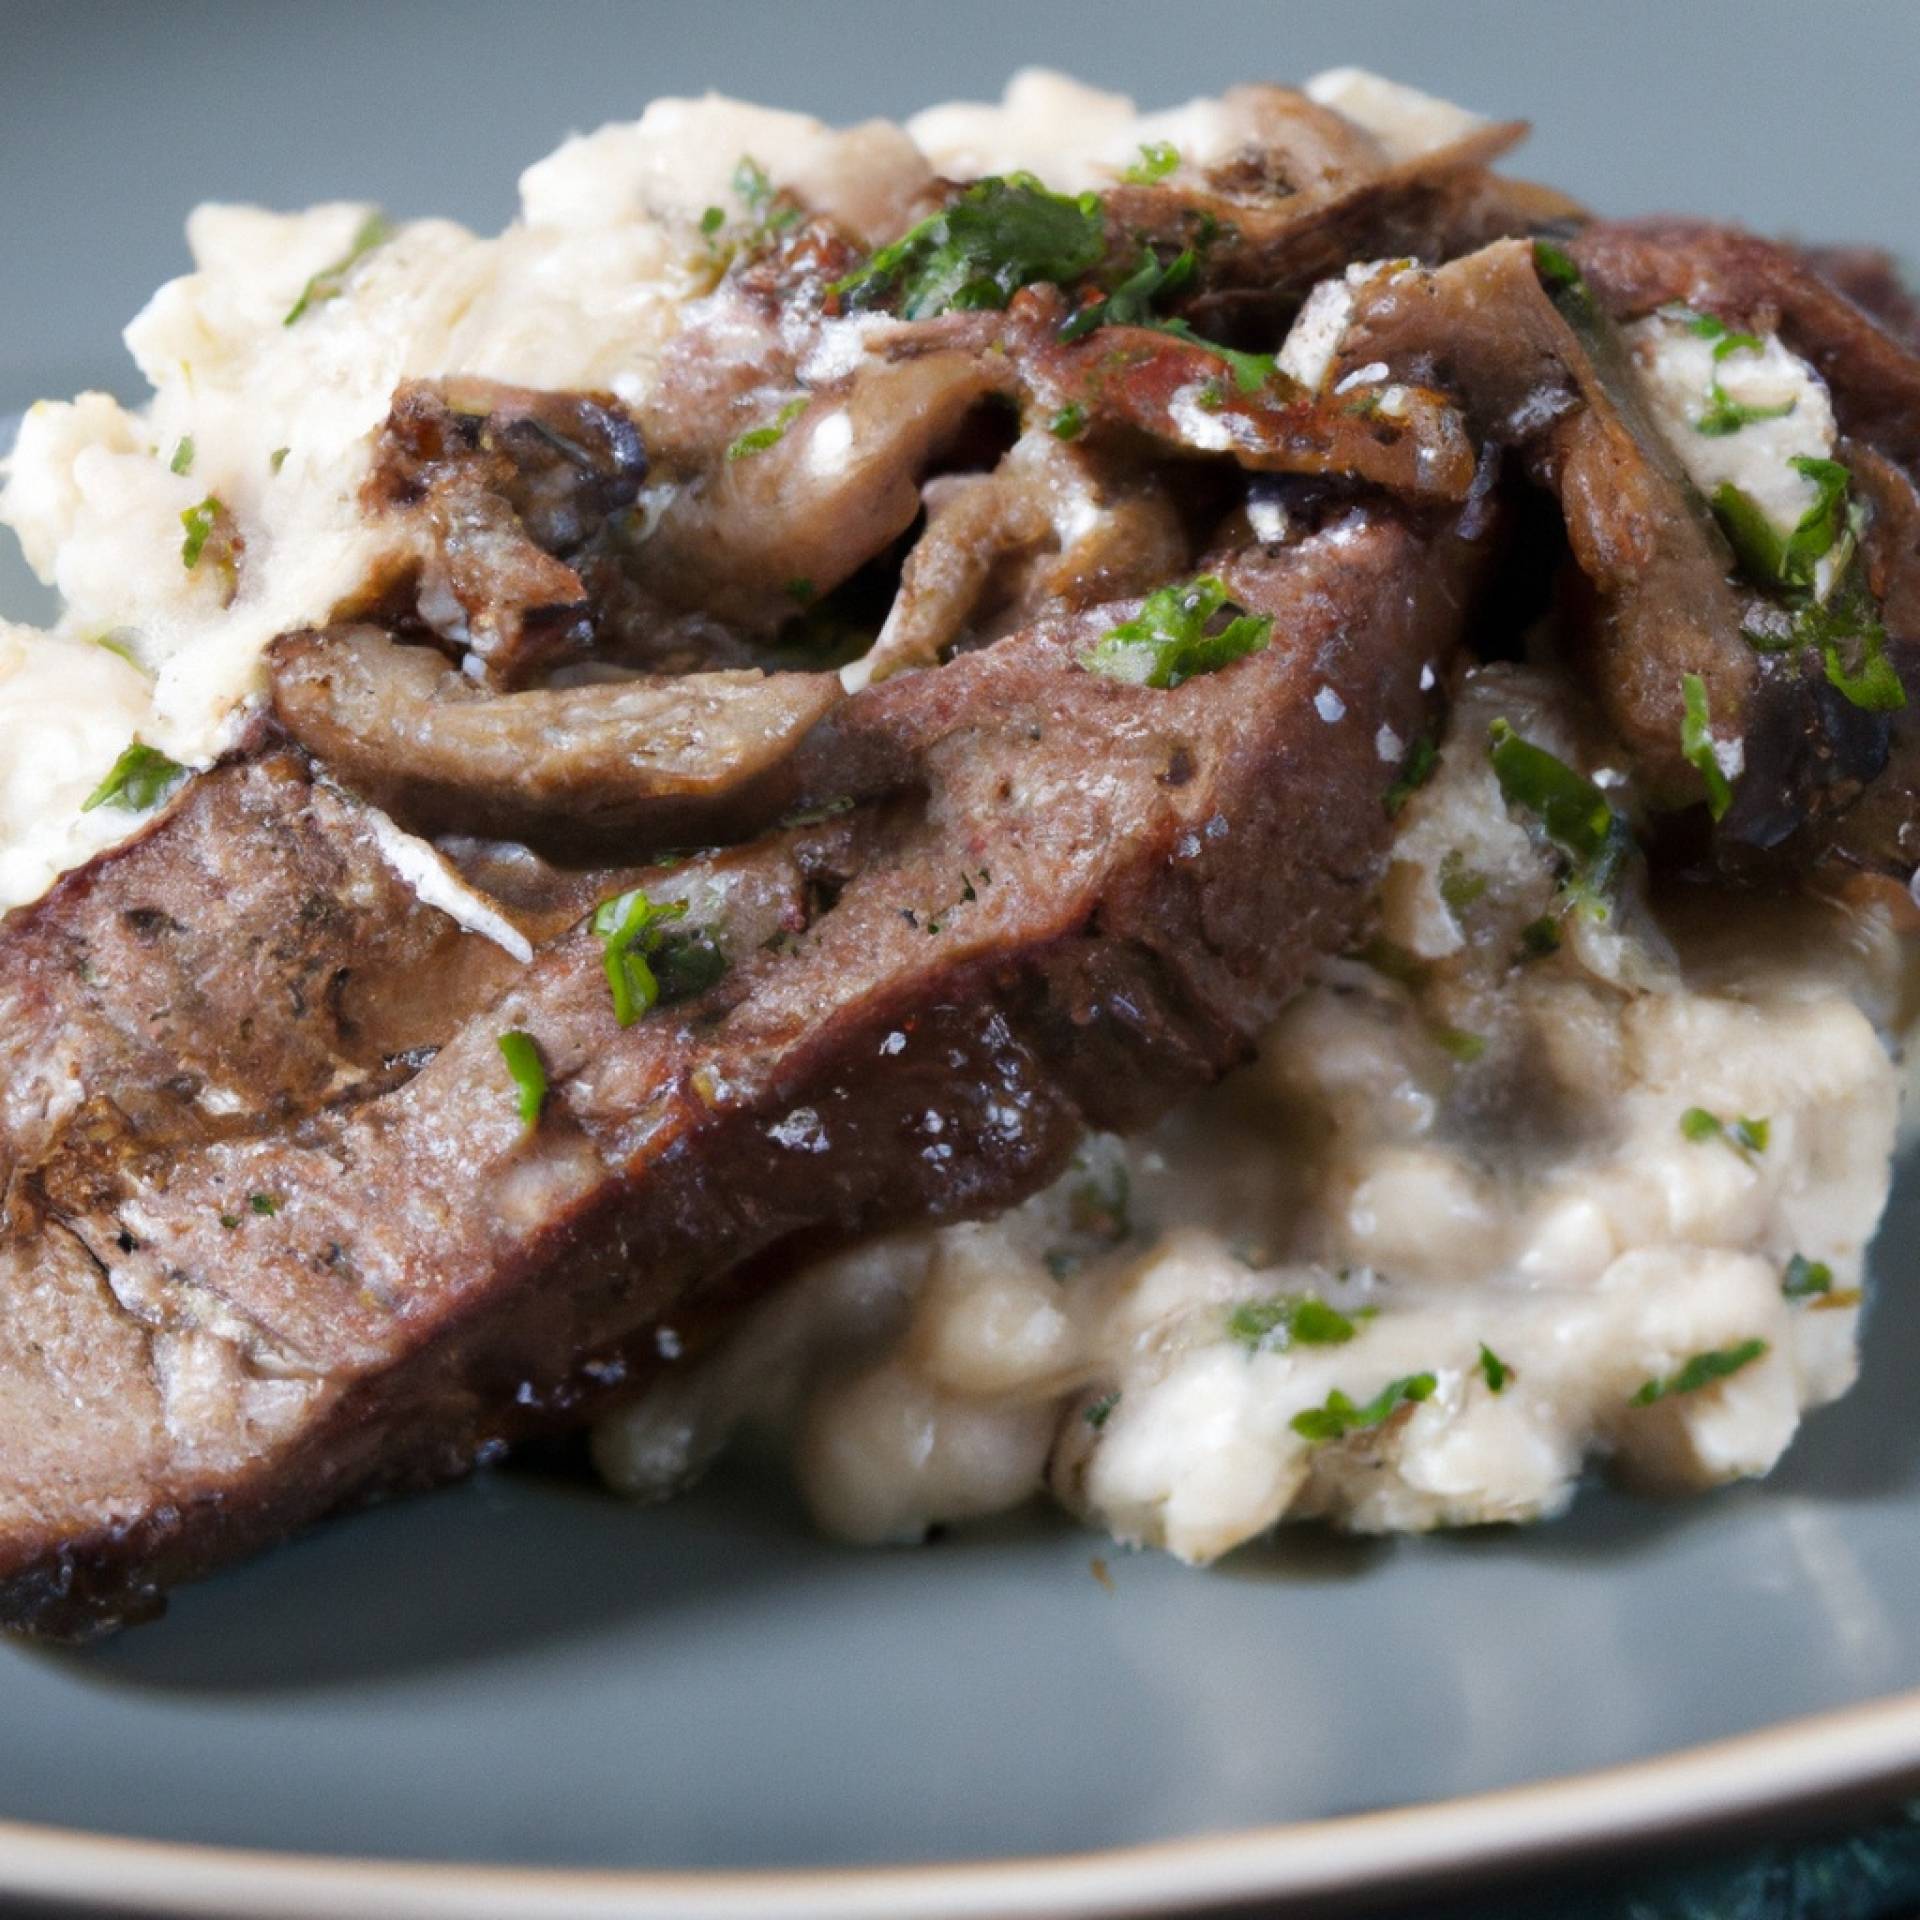 Whole30 Grilled Flank Steak with Chive Risotto with Mushroom Sauce